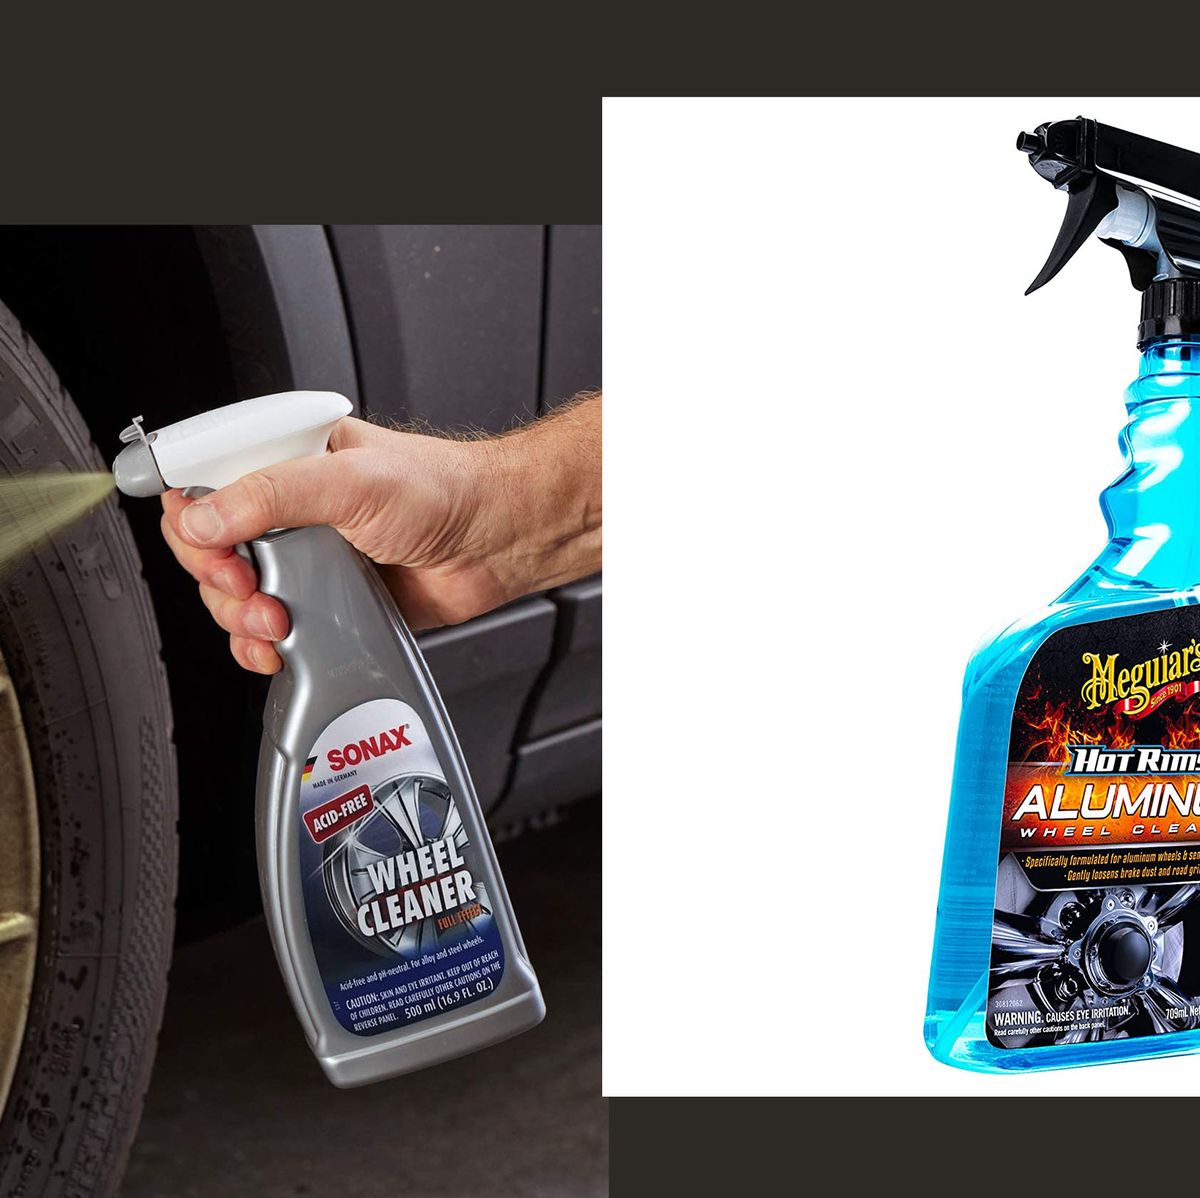 Rev Auto Wheel Cleaning Kit (3 Items) - Professional Wheel Cleaning Kit Includes Wheel Cleaner, Wheel Brush, and Tire Brush/Car Rim Cleaner Kit That